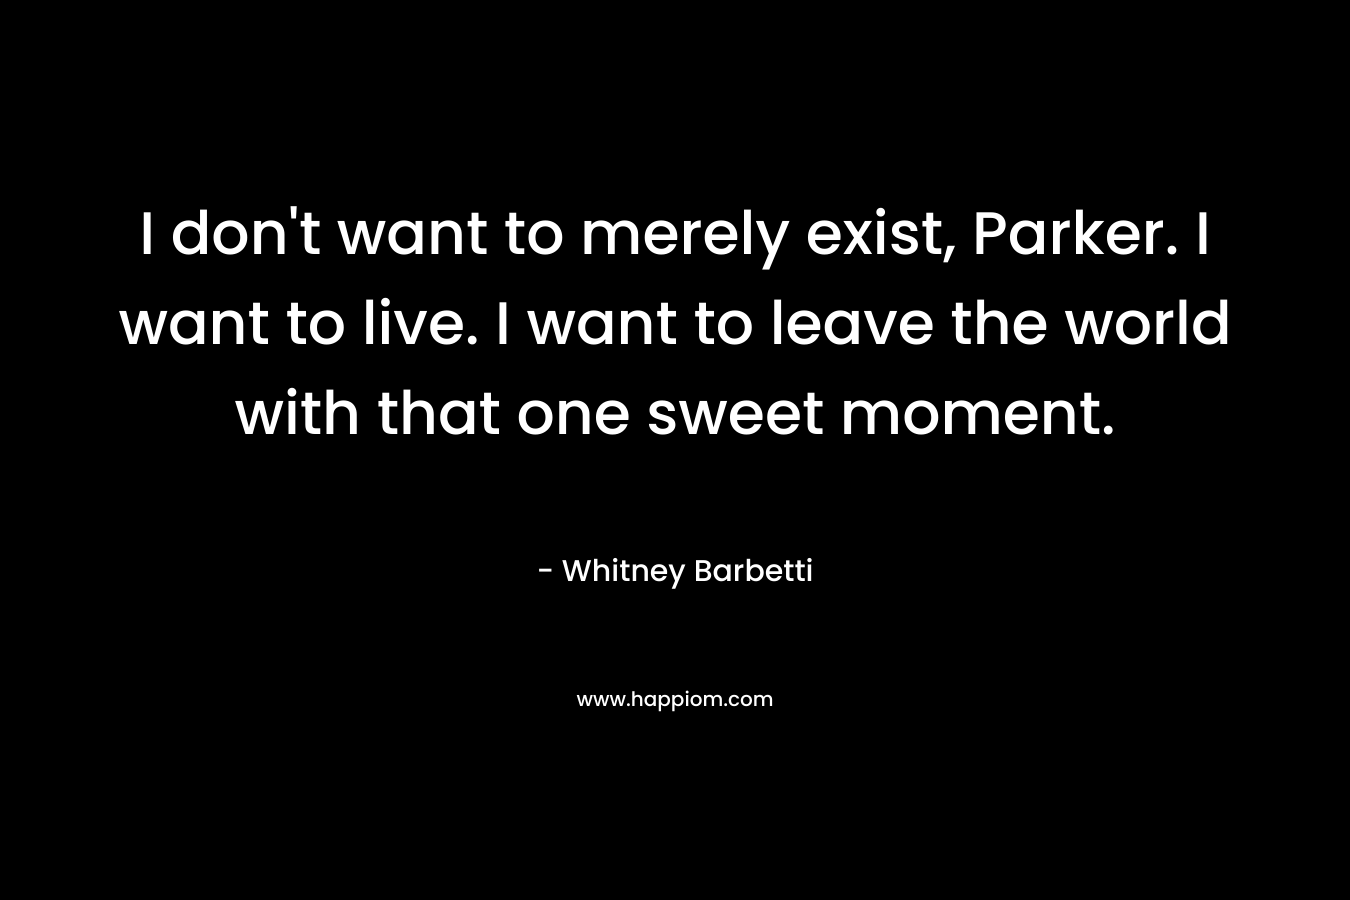 I don't want to merely exist, Parker. I want to live. I want to leave the world with that one sweet moment.